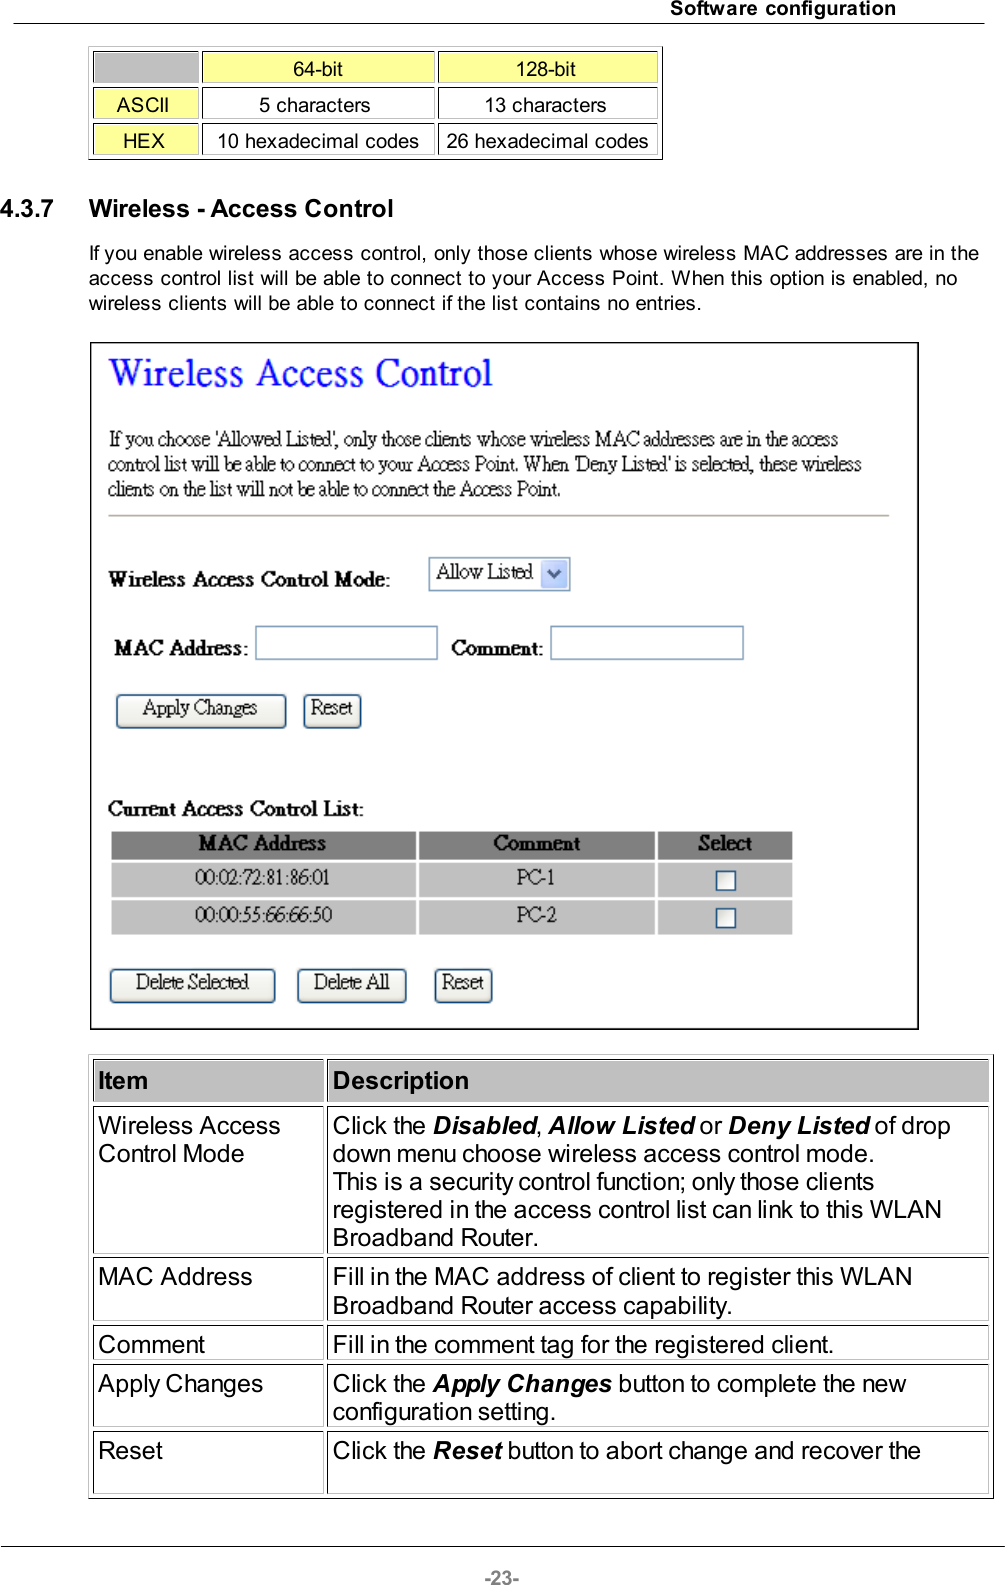 Software configuration-23-64-bit128-bit ASCII 5 characters 13 characters HEX 10 hexadecimal codes26 hexadecimal codes4.3.7 Wireless - Access ControlIf you enable wireless access control, only those clients whose wireless MAC addresses are in theaccess control list will be able to connect to your Access Point. When this option is enabled, nowireless clients will be able to connect if the list contains no entries.ItemDescriptionWireless AccessControl ModeClick the Disabled, Allow Listed or Deny Listed of dropdown menu choose wireless access control mode. This is a security control function; only those clientsregistered in the access control list can link to this WLANBroadband Router.MAC AddressFill in the MAC address of client to register this WLANBroadband Router access capability.CommentFill in the comment tag for the registered client.Apply Changes Click the Apply Changes button to complete the newconfiguration setting.Reset Click the Reset button to abort change and recover the